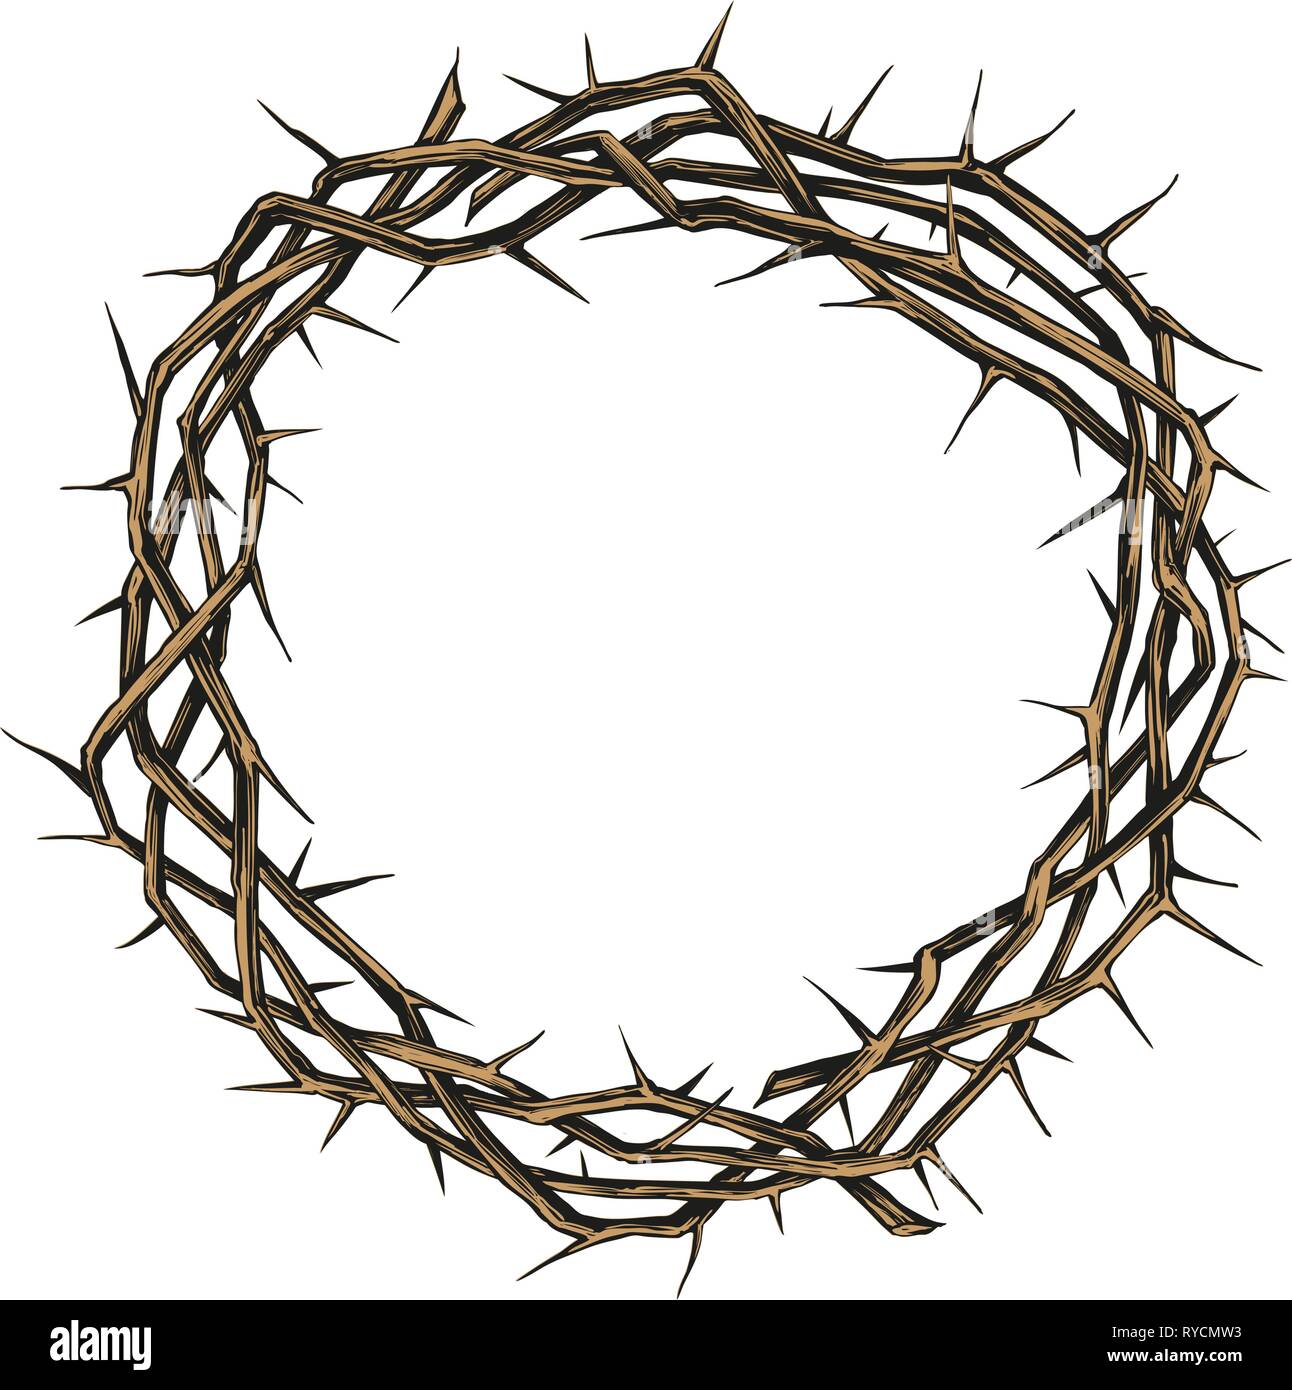 crown of thorns, easter religious symbol of Christianity hand drawn vector illustration sketch Stock Vector